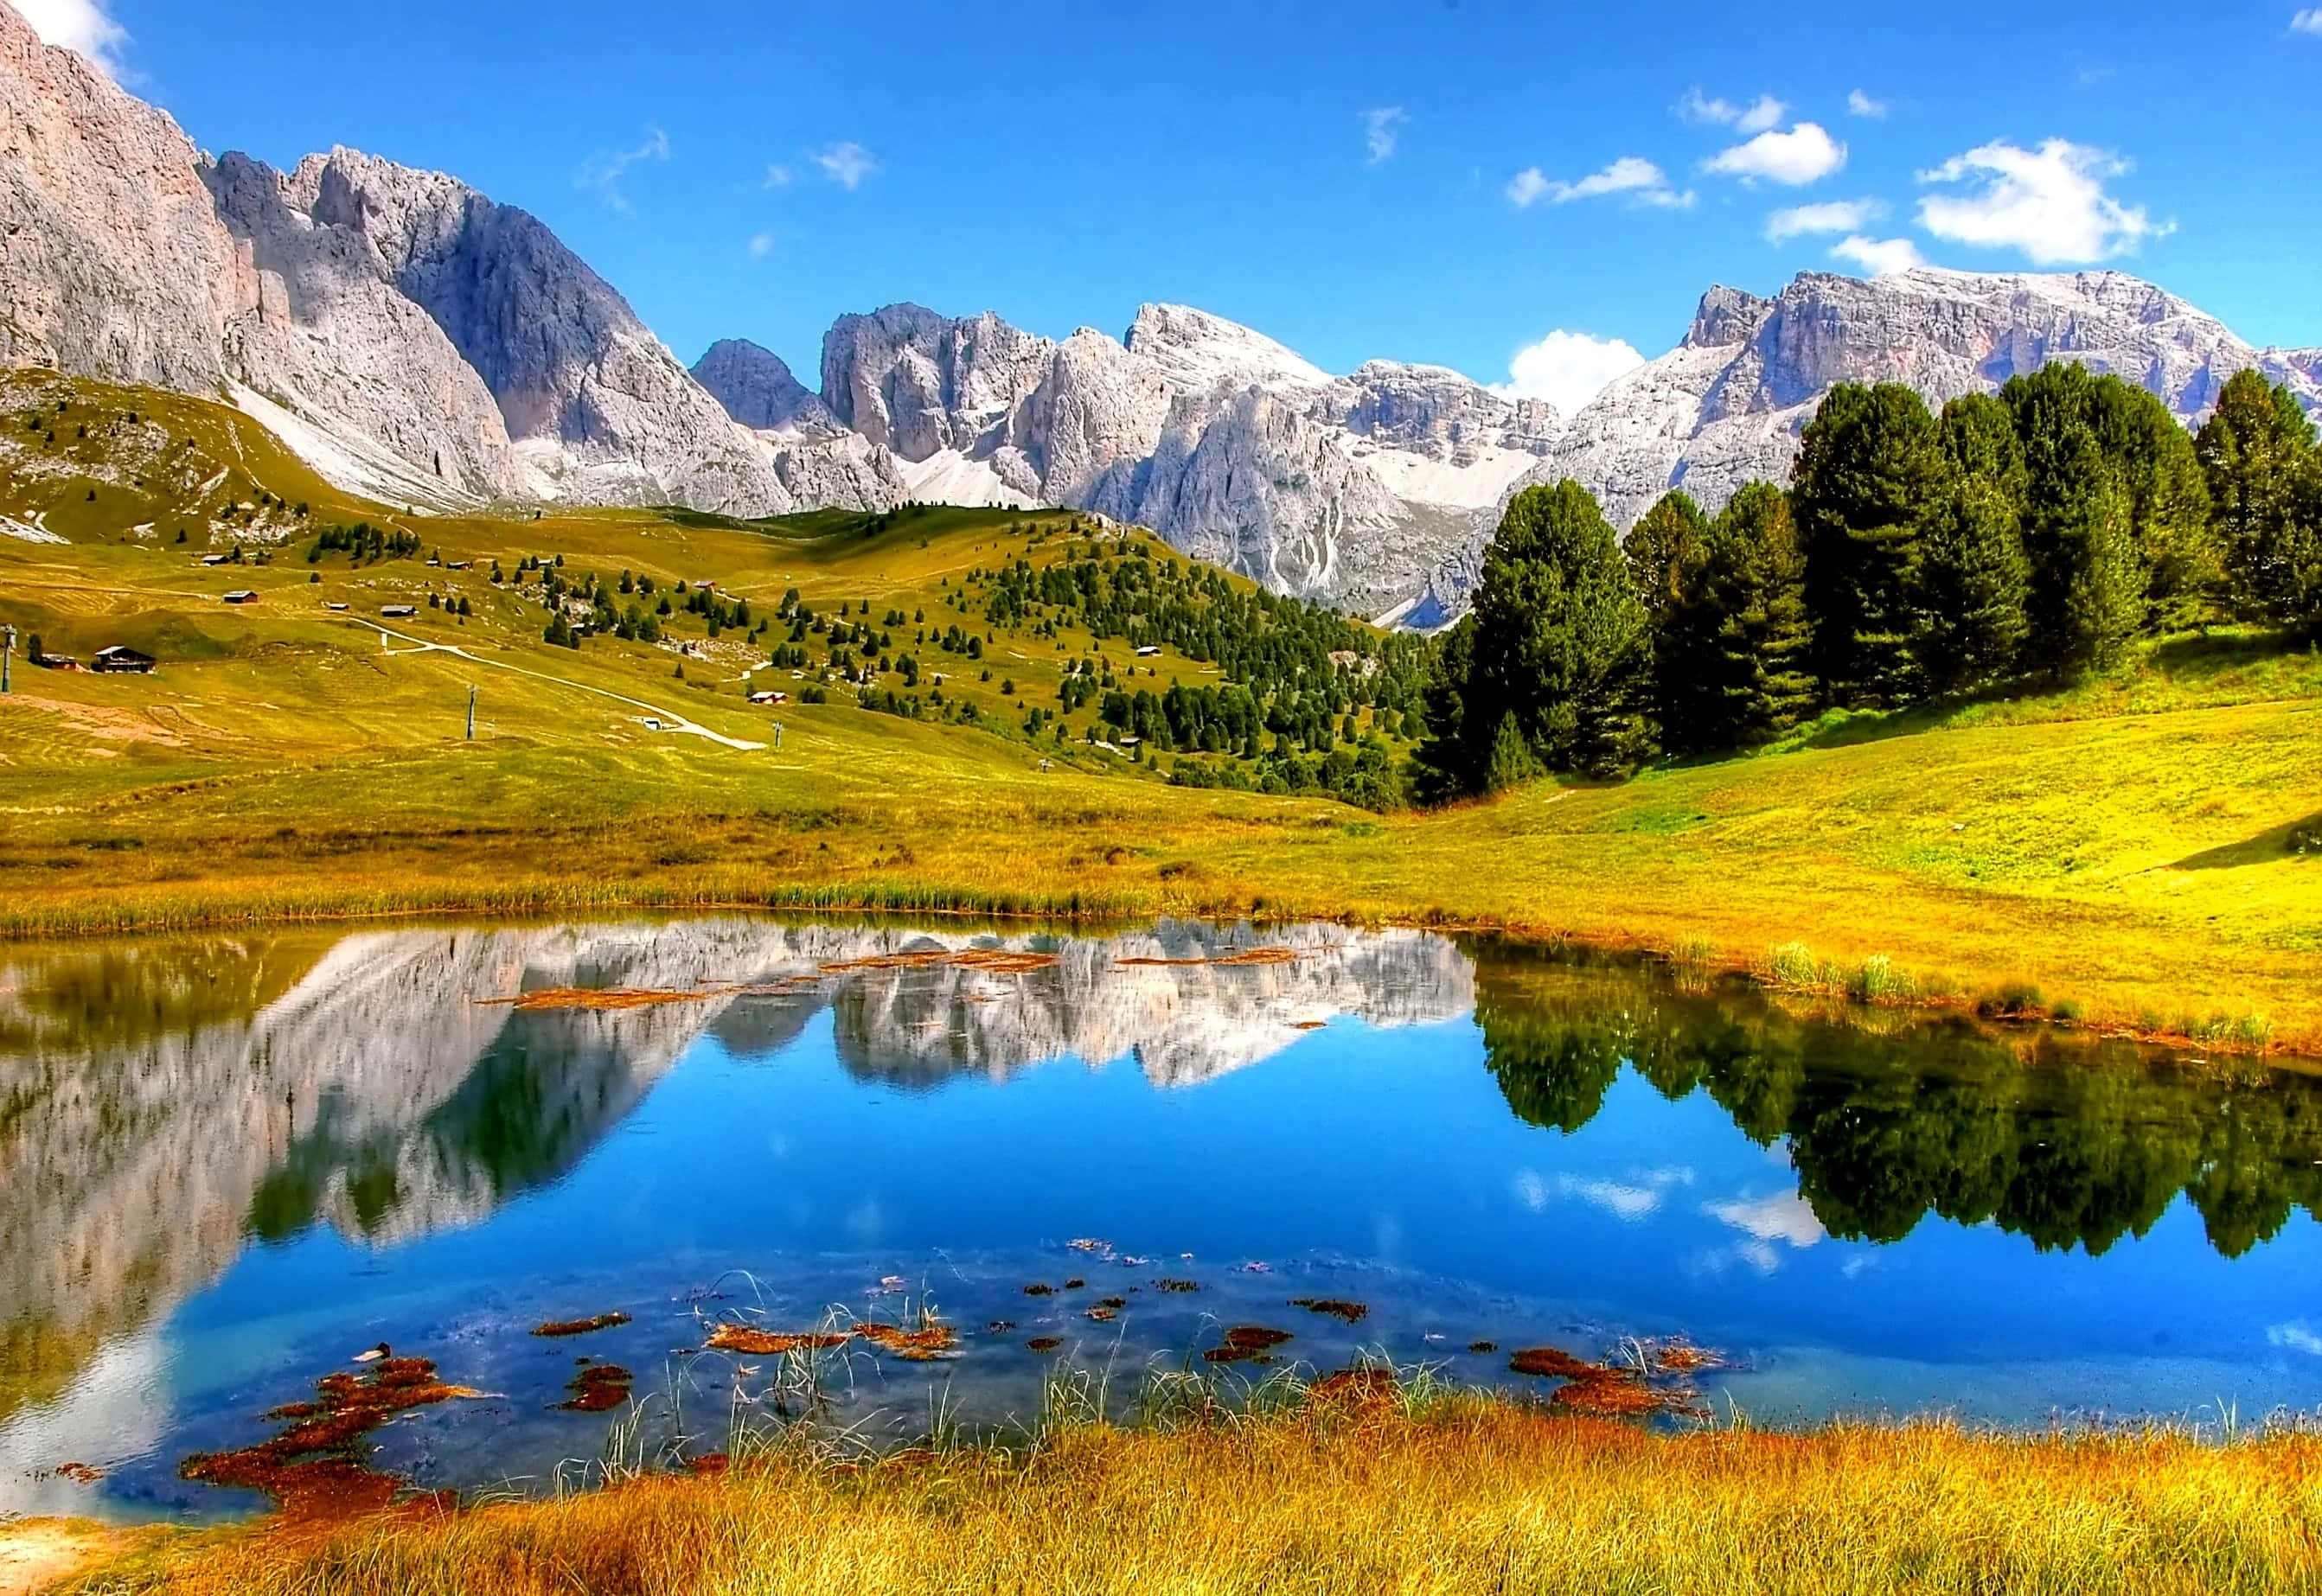 Marvel at the Beautiful Mountains of Cool Landscape Wallpaper